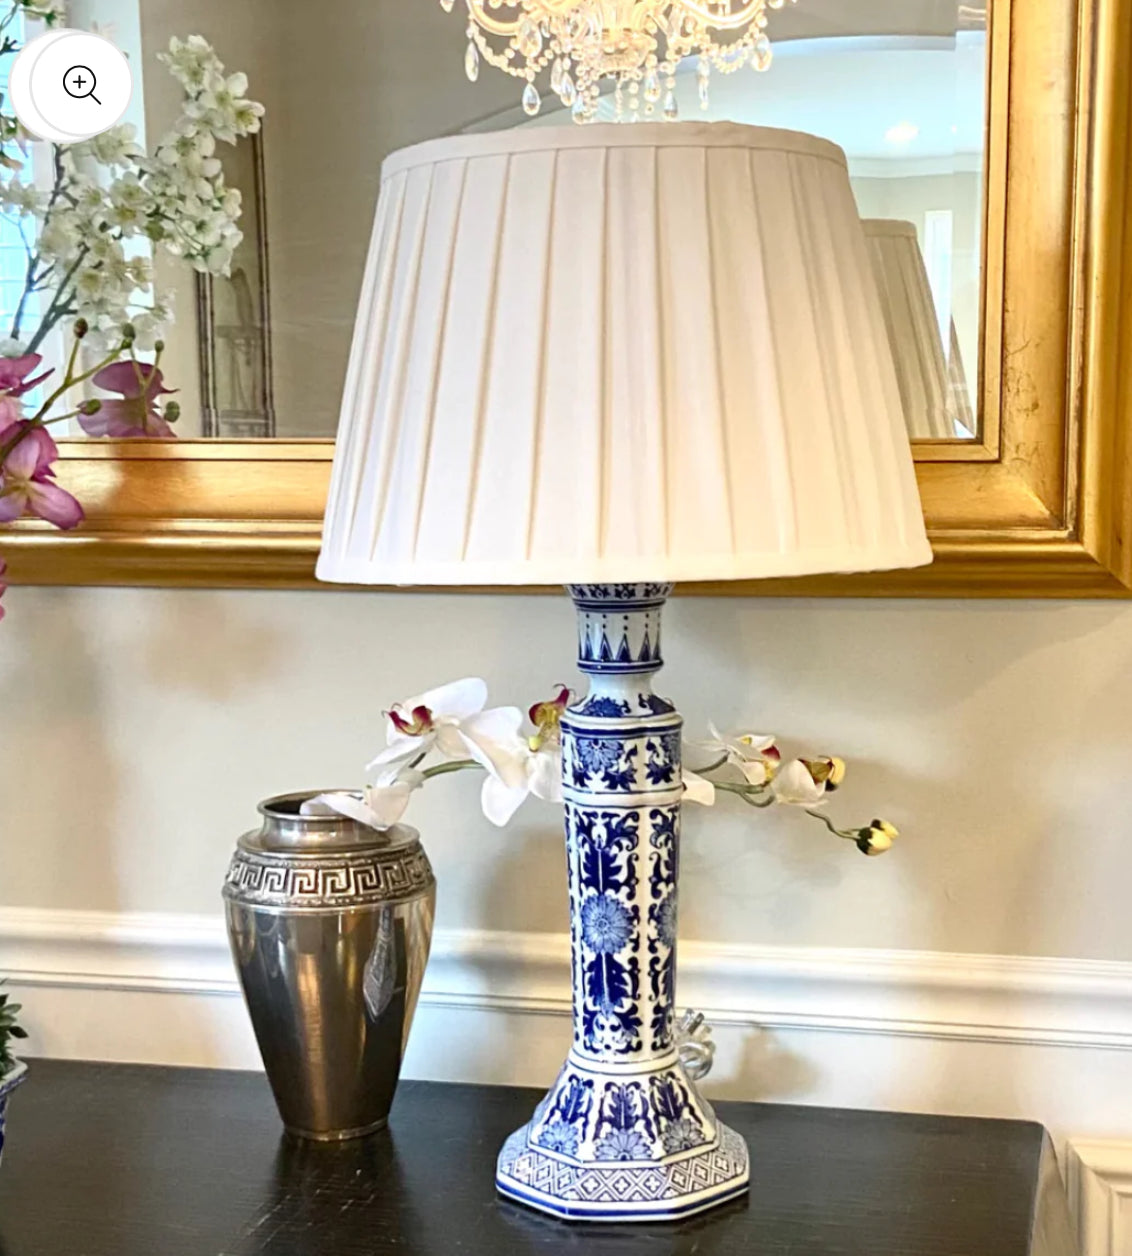 Vintage porcelain blue & white chinoiserie chic statuesque candlestick lamp.